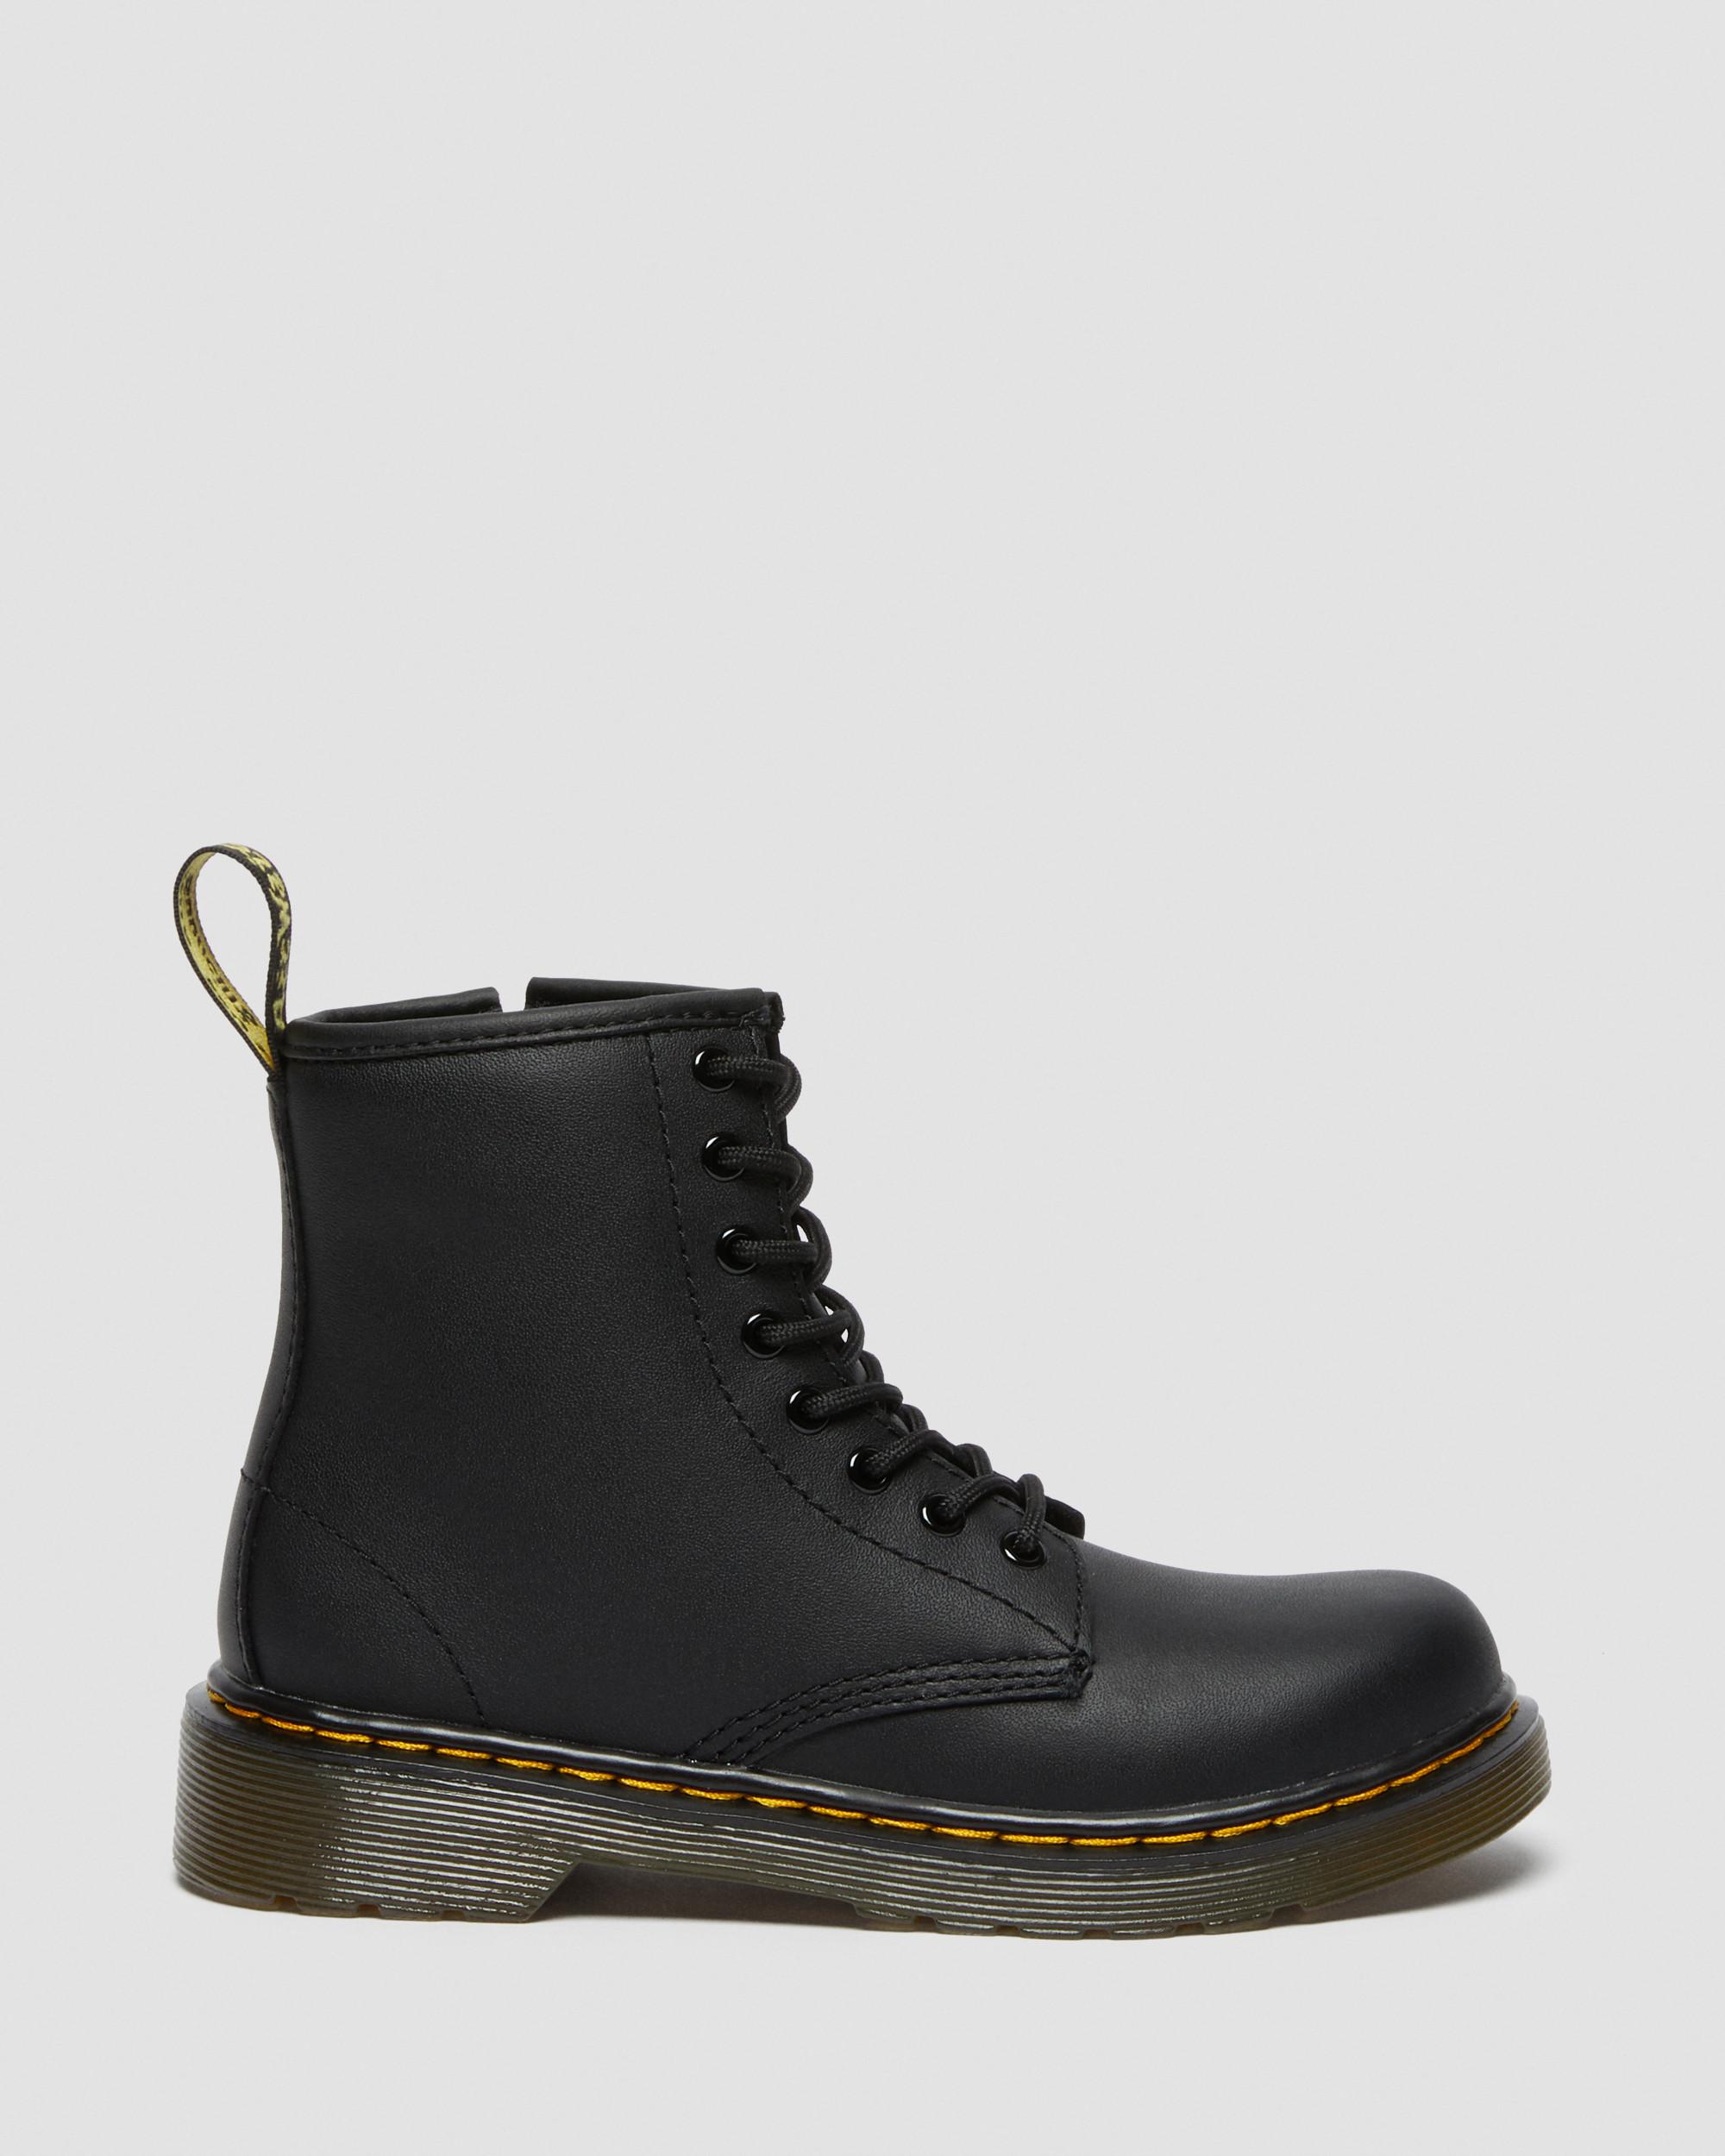 Lace T Junior Martens | Black in Boots 1460 Dr. Leather Softy Up